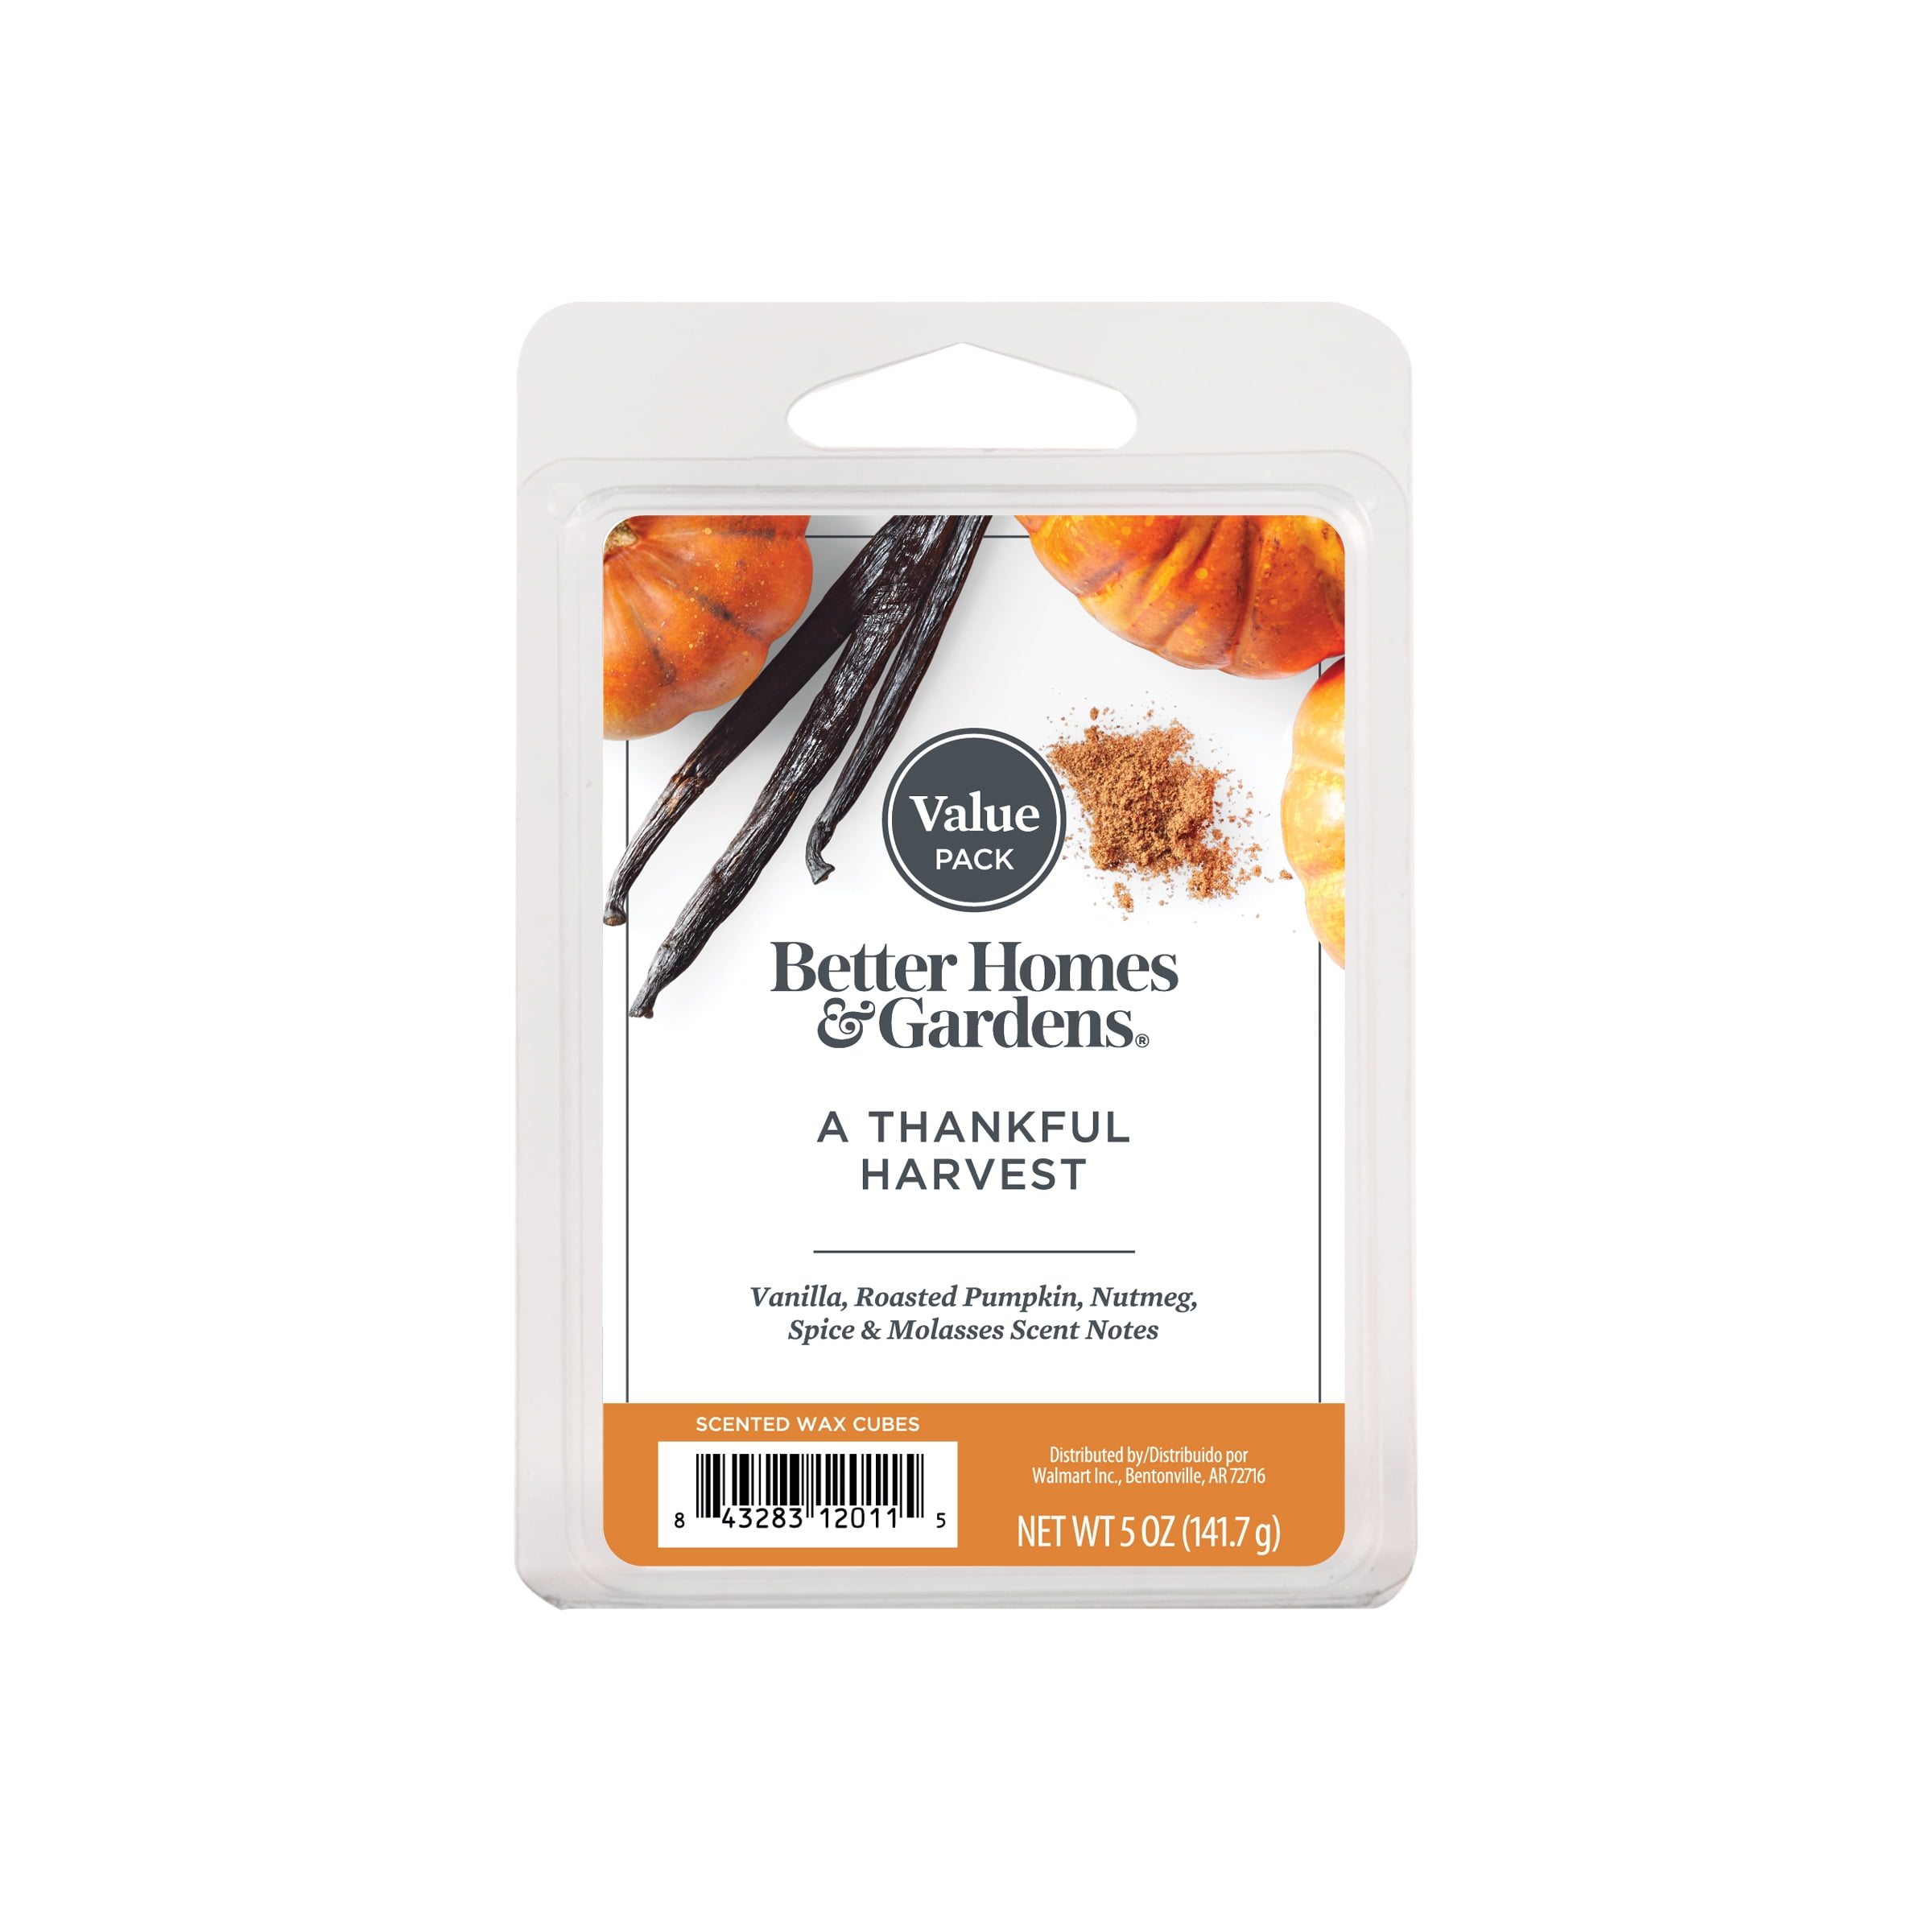 Lot of 5 Better Homes & Gardens A Thankful Harvest Scented Wax Cubes Value Pack 